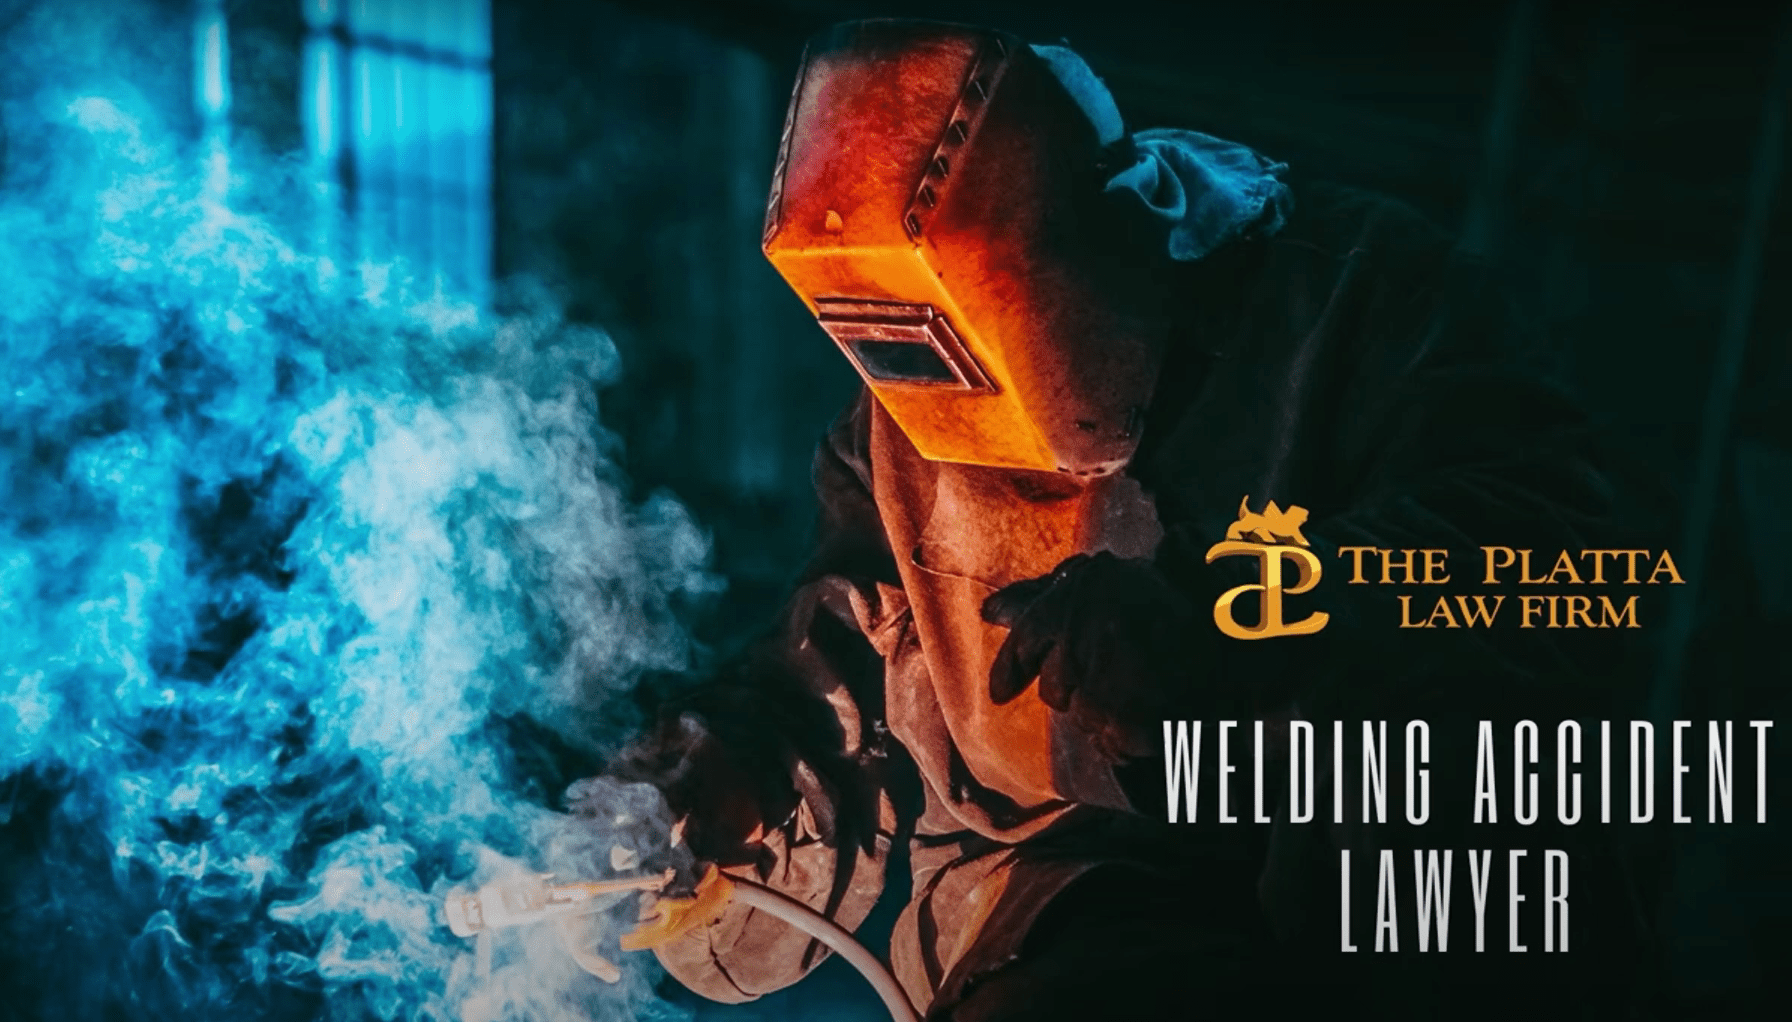 WELDING ACCIDENT LAWYERS Post